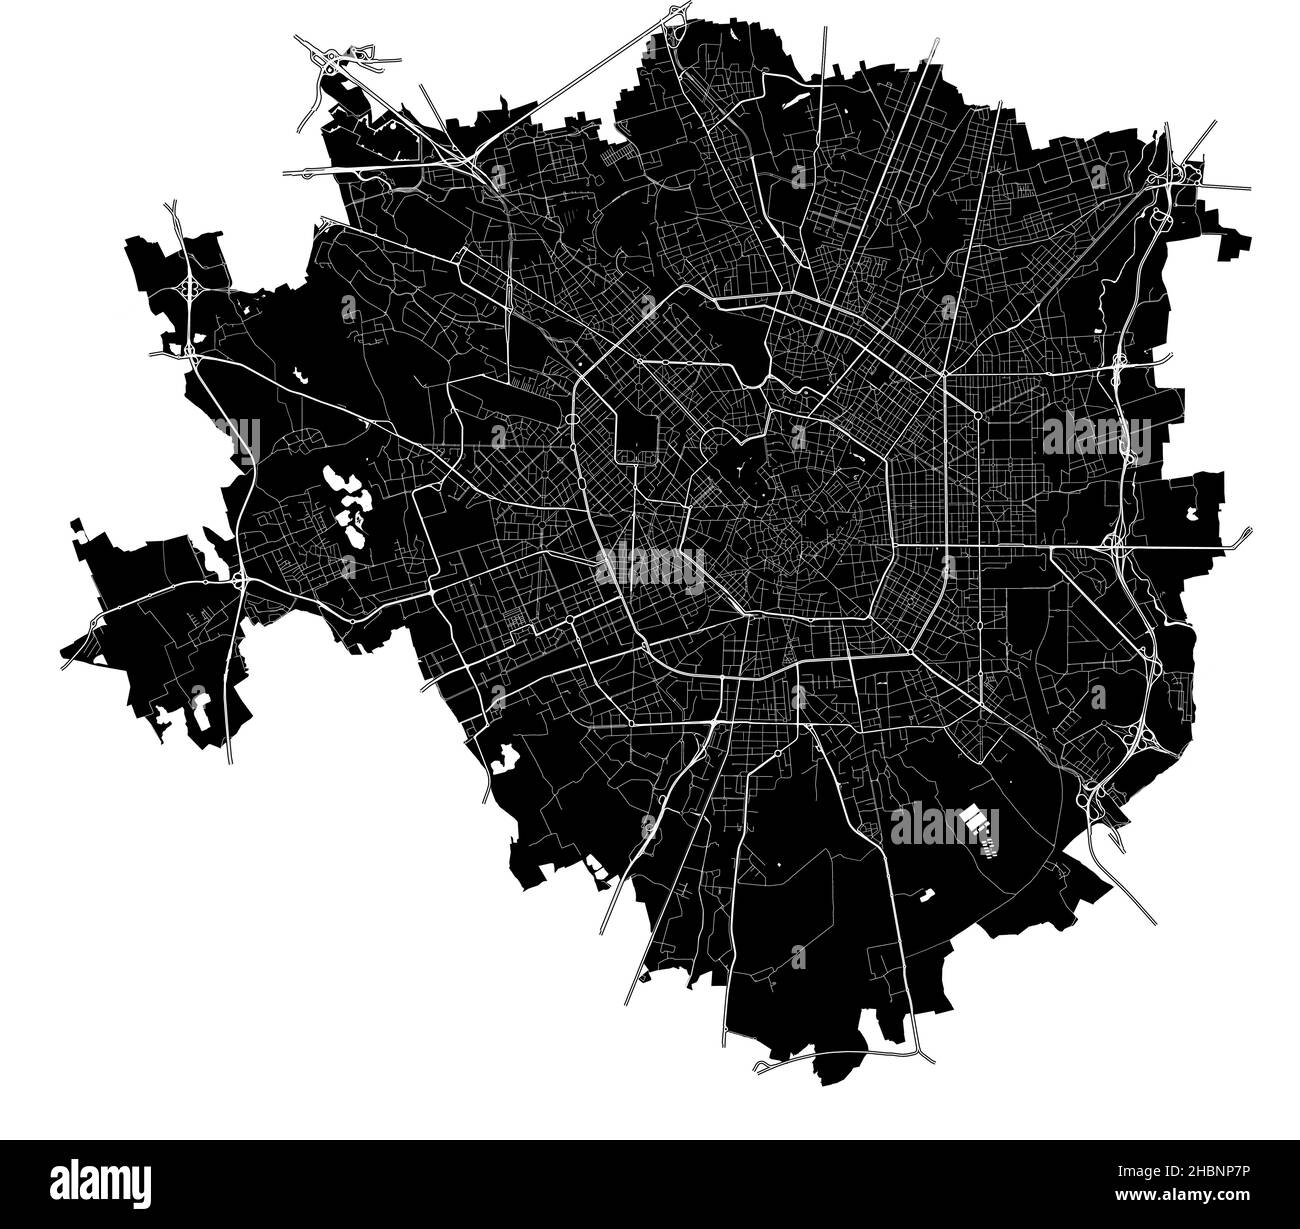 Milan, Italy, high resolution vector map with city boundaries, and editable paths. The city map was drawn with white areas and lines for main roads, s Stock Vector